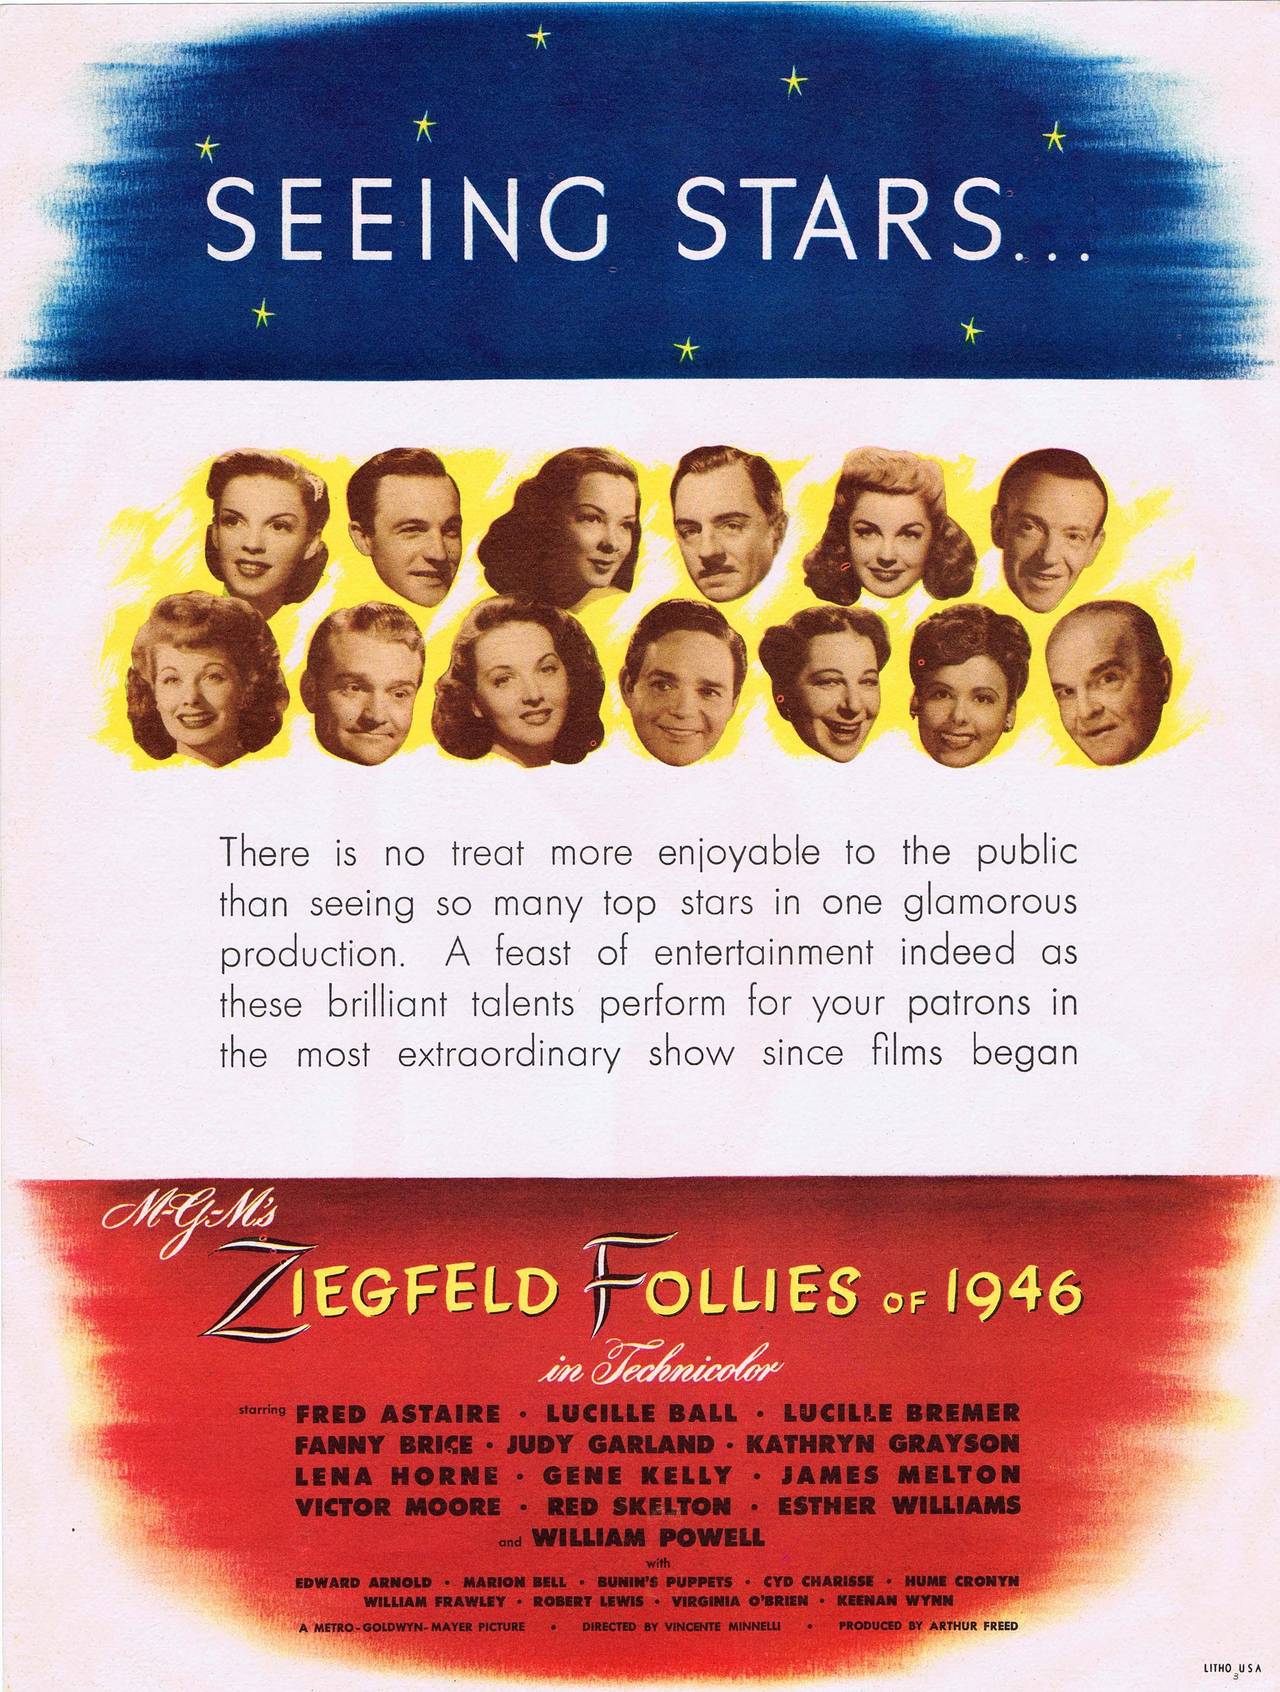 Set of four original trade cards for a US musical film, Ziegfeld Follies of 1946, featuring an all star cast: Fred Astaire, Judy Garland, Lucille Ball, Lucille Bremer, Gene Kelly and others. Directed by Roy Del Ruth and Vincente Minnelli, produced